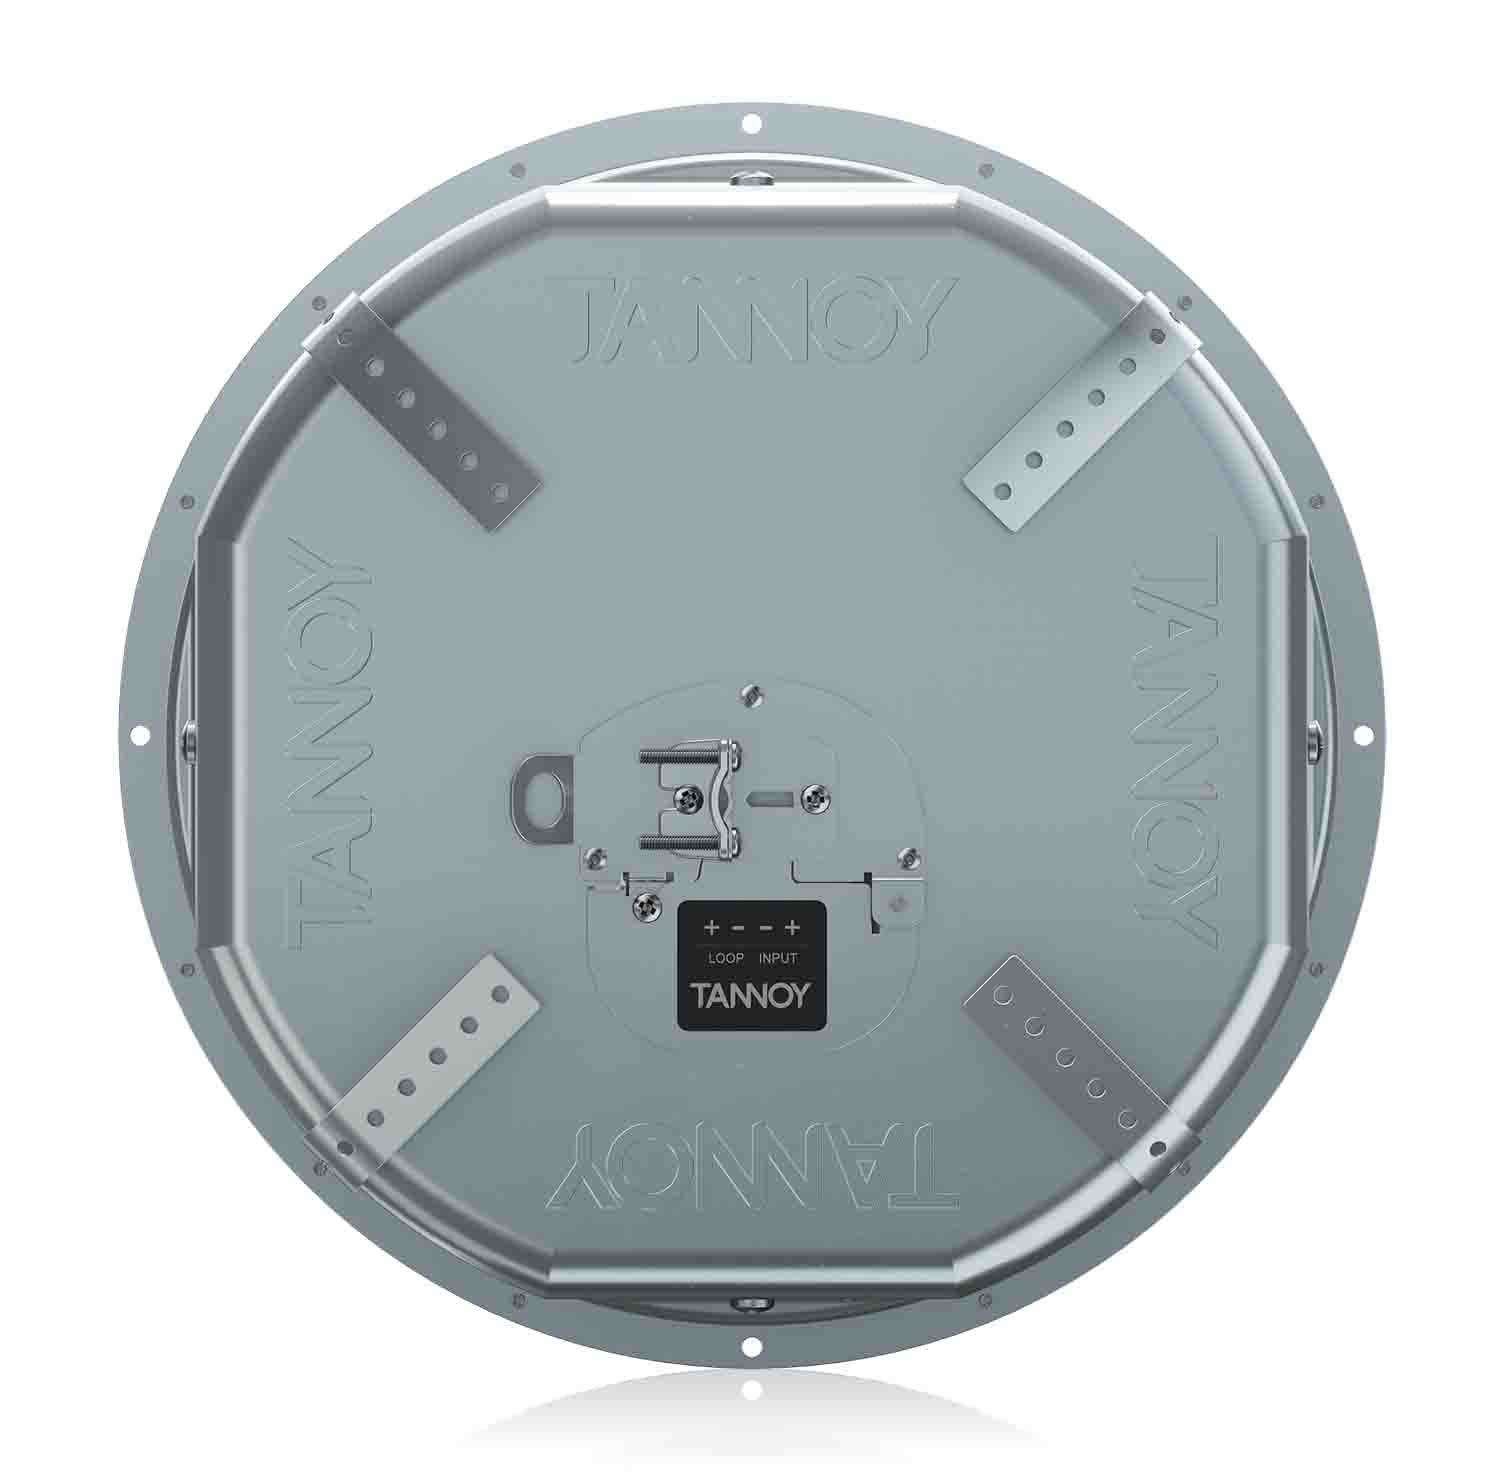 Tannoy CMS 603 PI 16 OHM BACKCAN Back Can for CMS 603 PI Series Ceiling Loudspeakers - Pre-Install - Hollywood DJ